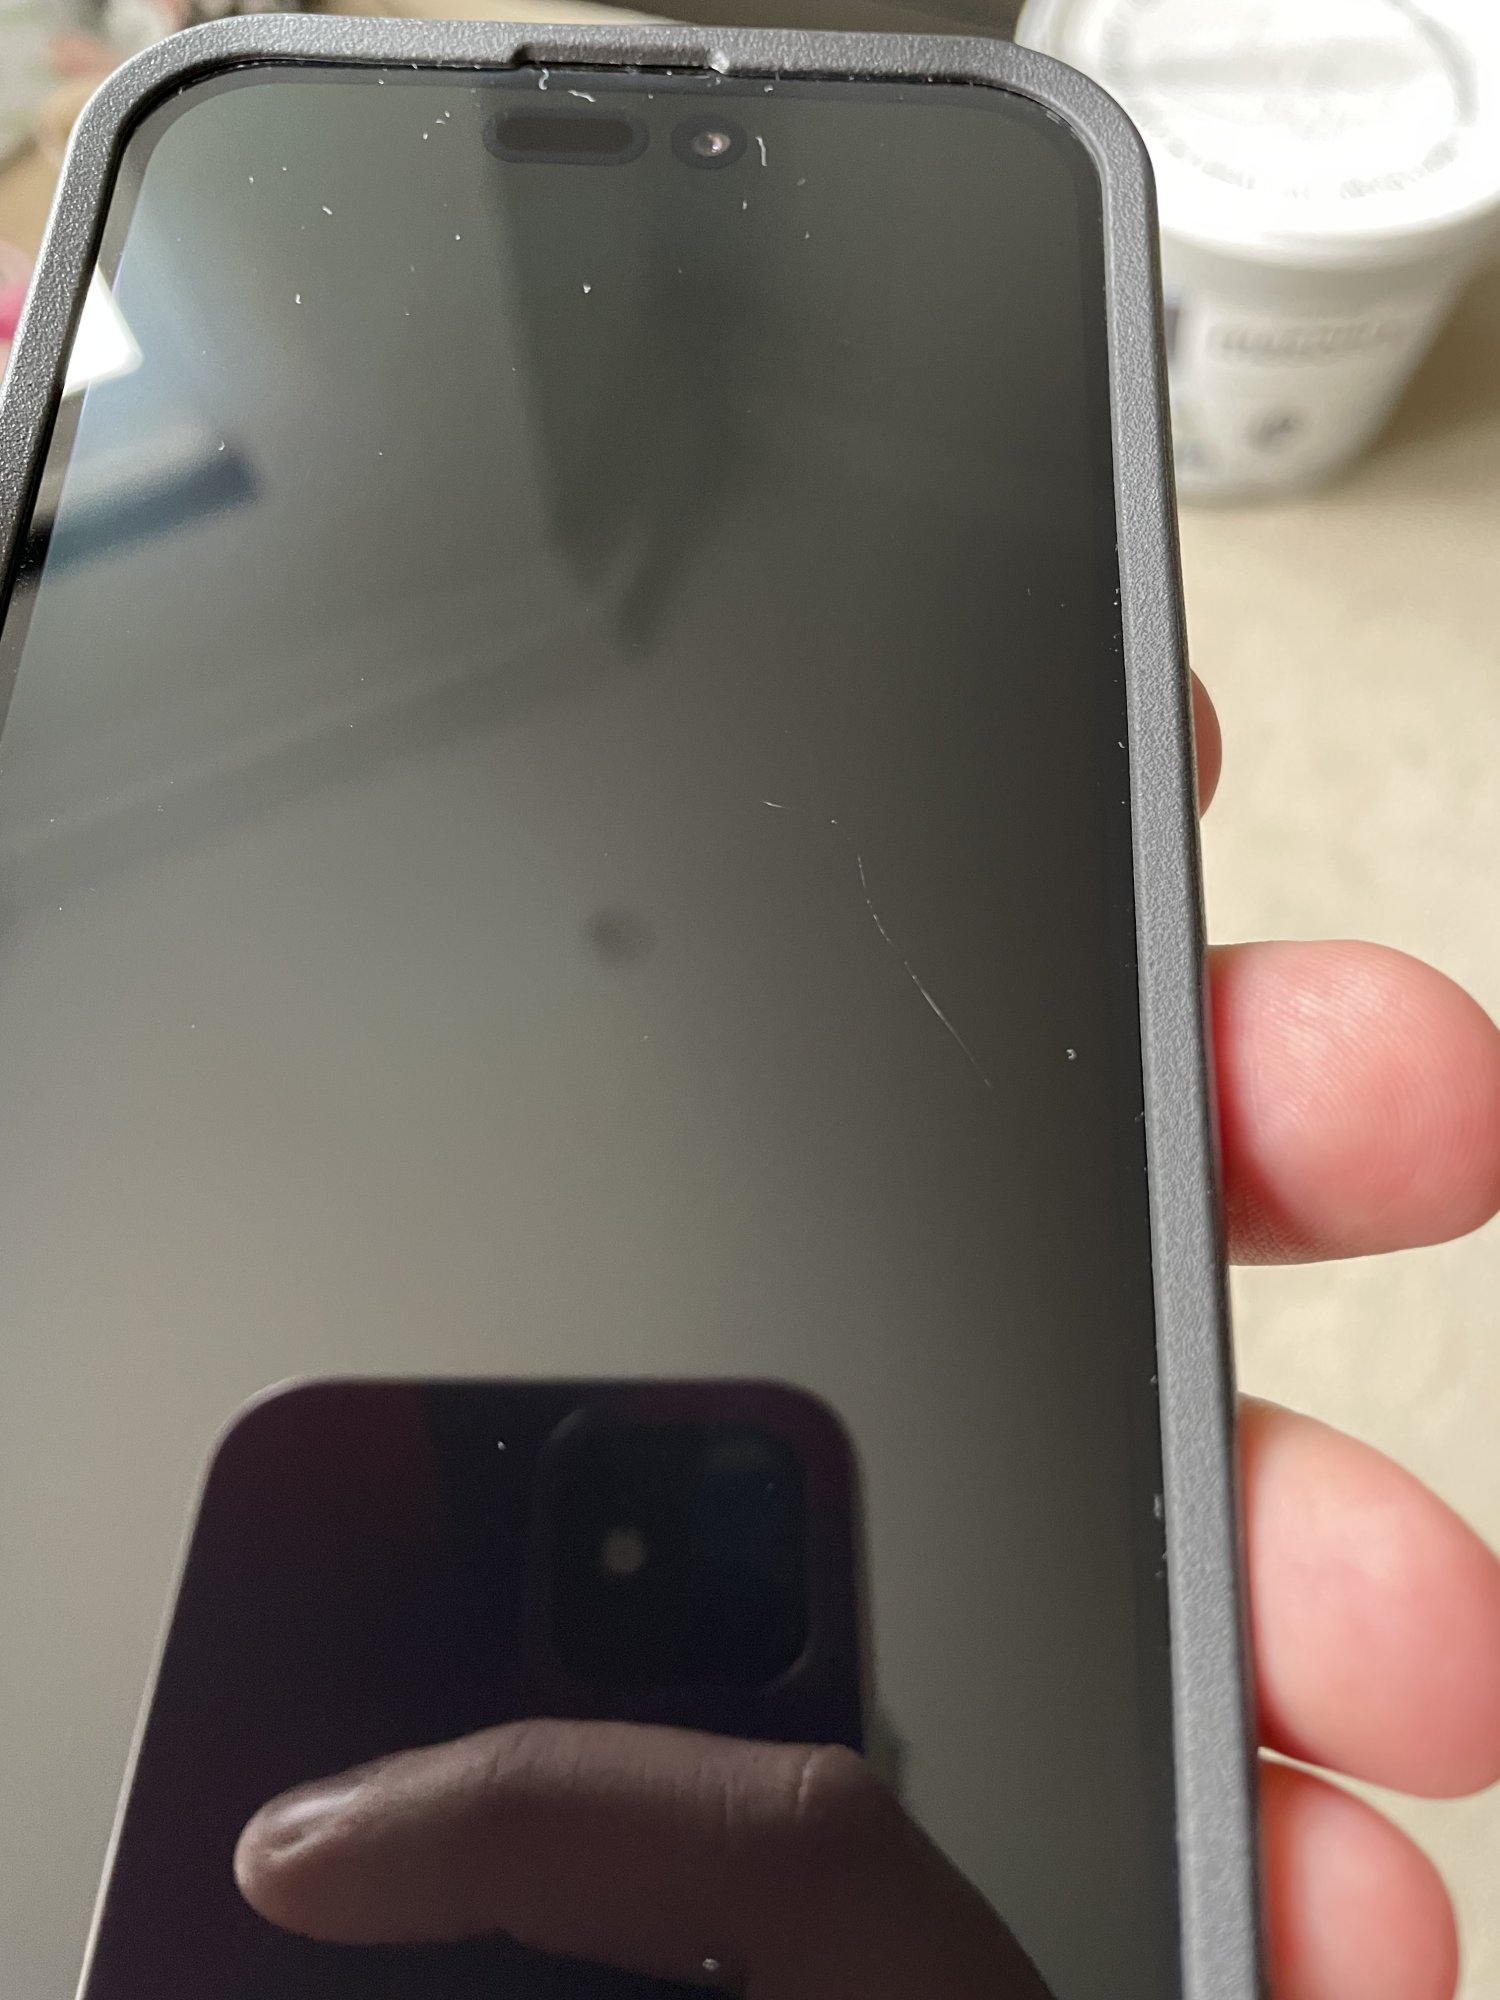 How to remove scratches from iPhone screen